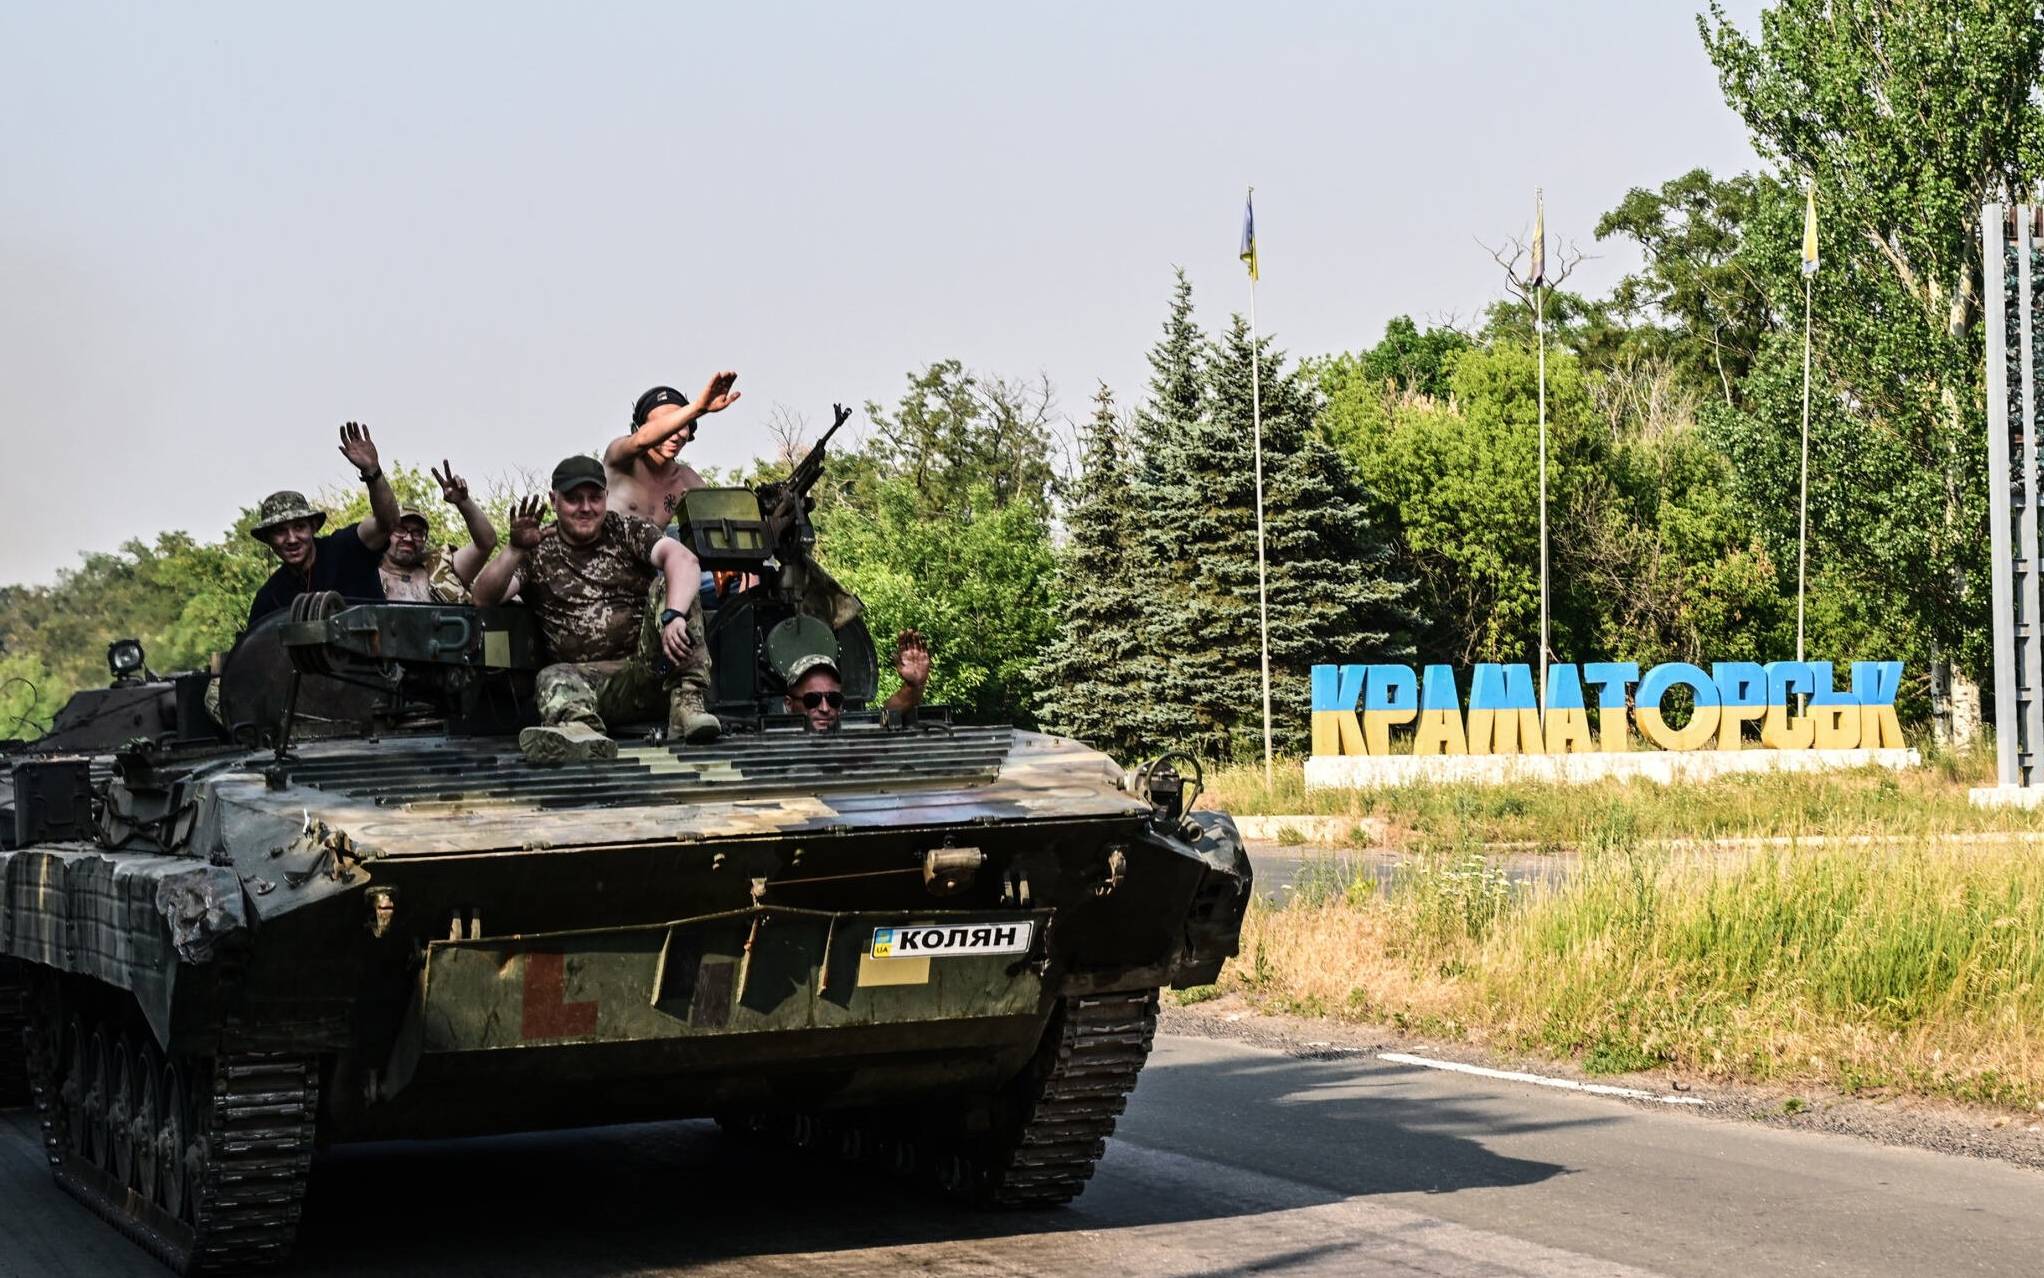 Ukrainian soldiers on the top of a Ukrainian armoured fighting vehicle gesture as they drive down at the exit of Kramatorsk, eastern Ukraine, on July 6, 2022, amid the Russian invasion of Ukraine. (Photo by MIGUEL MEDINA / AFP)